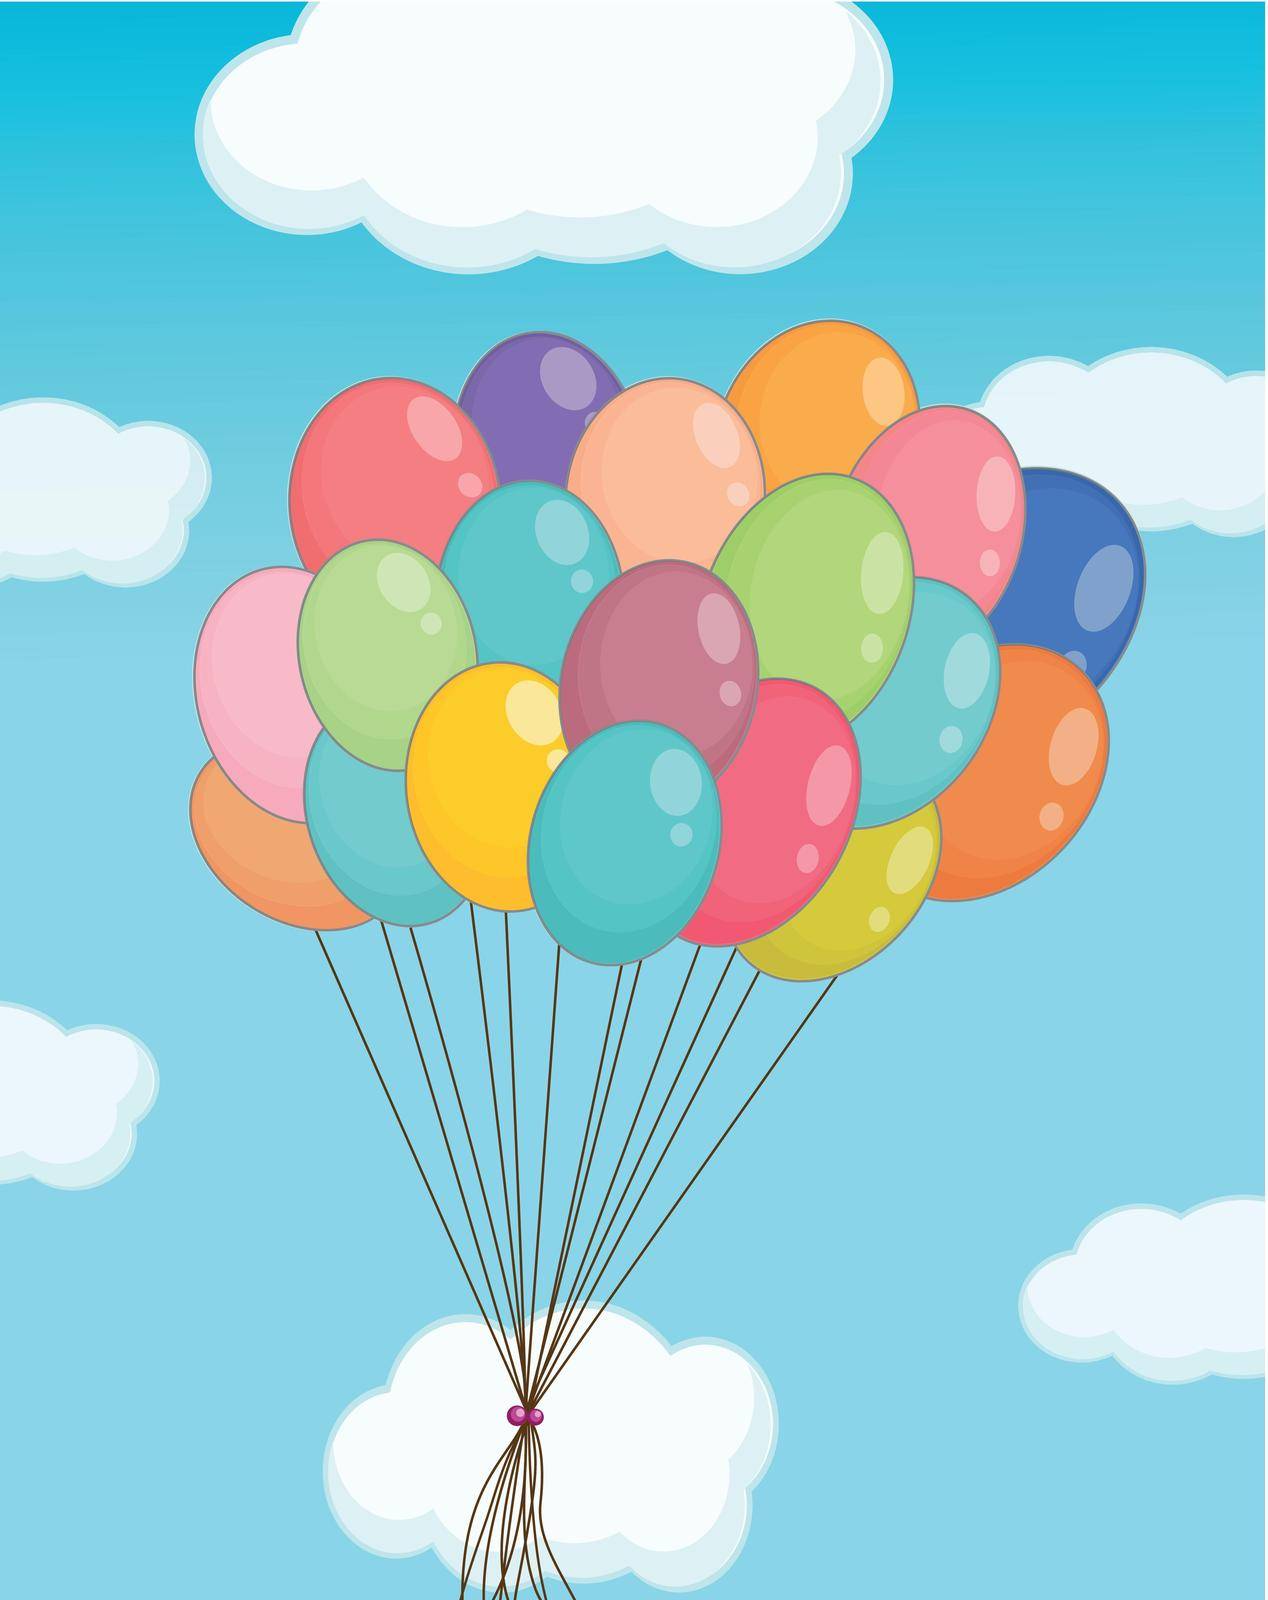 Balloons on a blue sky background